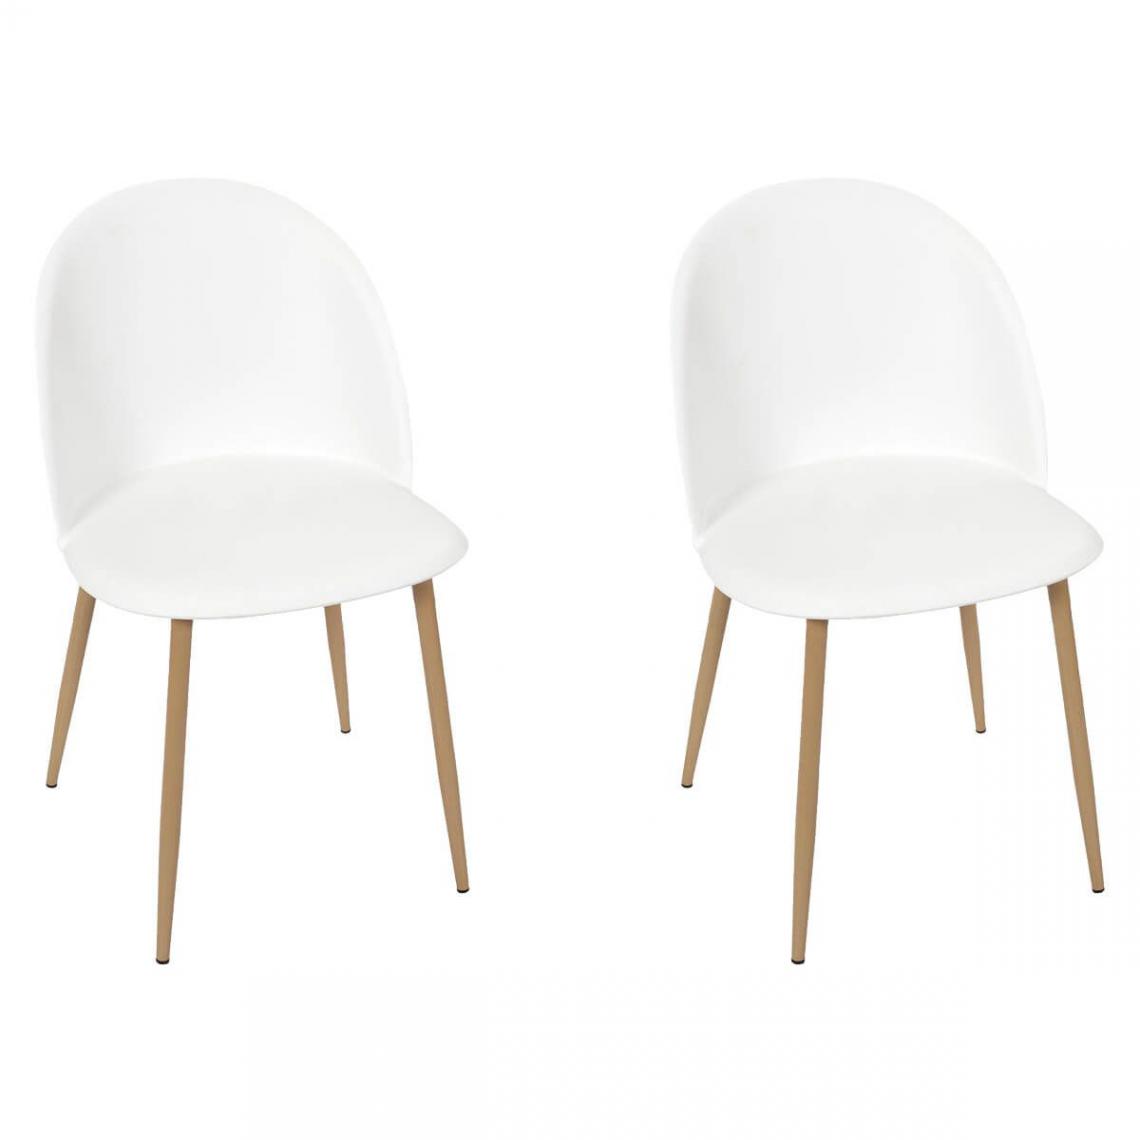 Altobuy - MADDY - Lot de 2 Chaises Scandinaves Blanches - Chaises